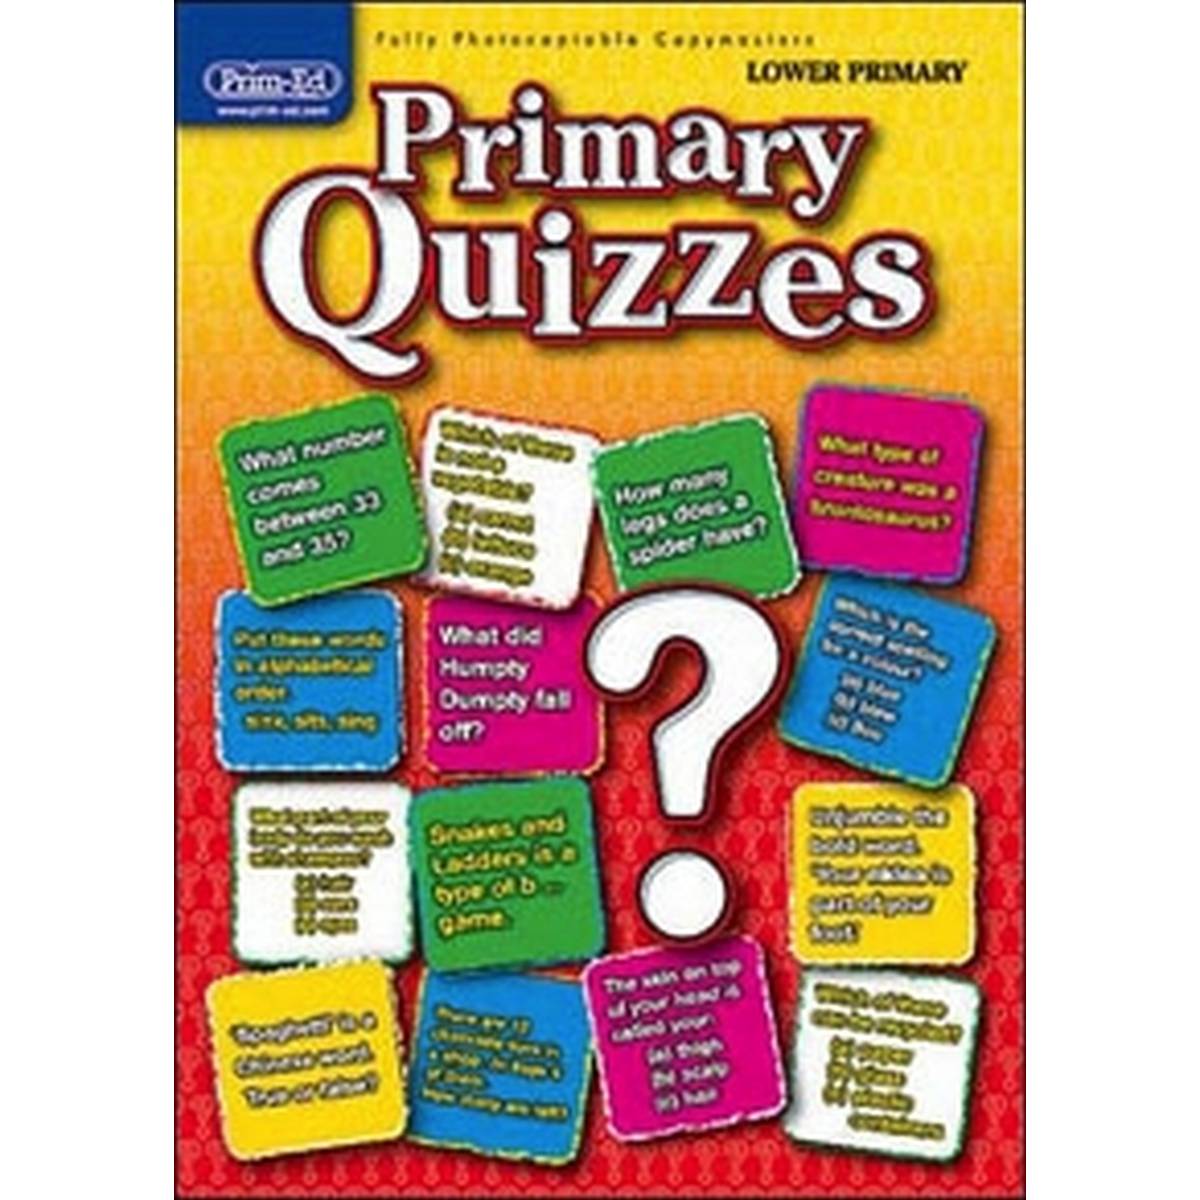 Primary Quizzes (Lower)